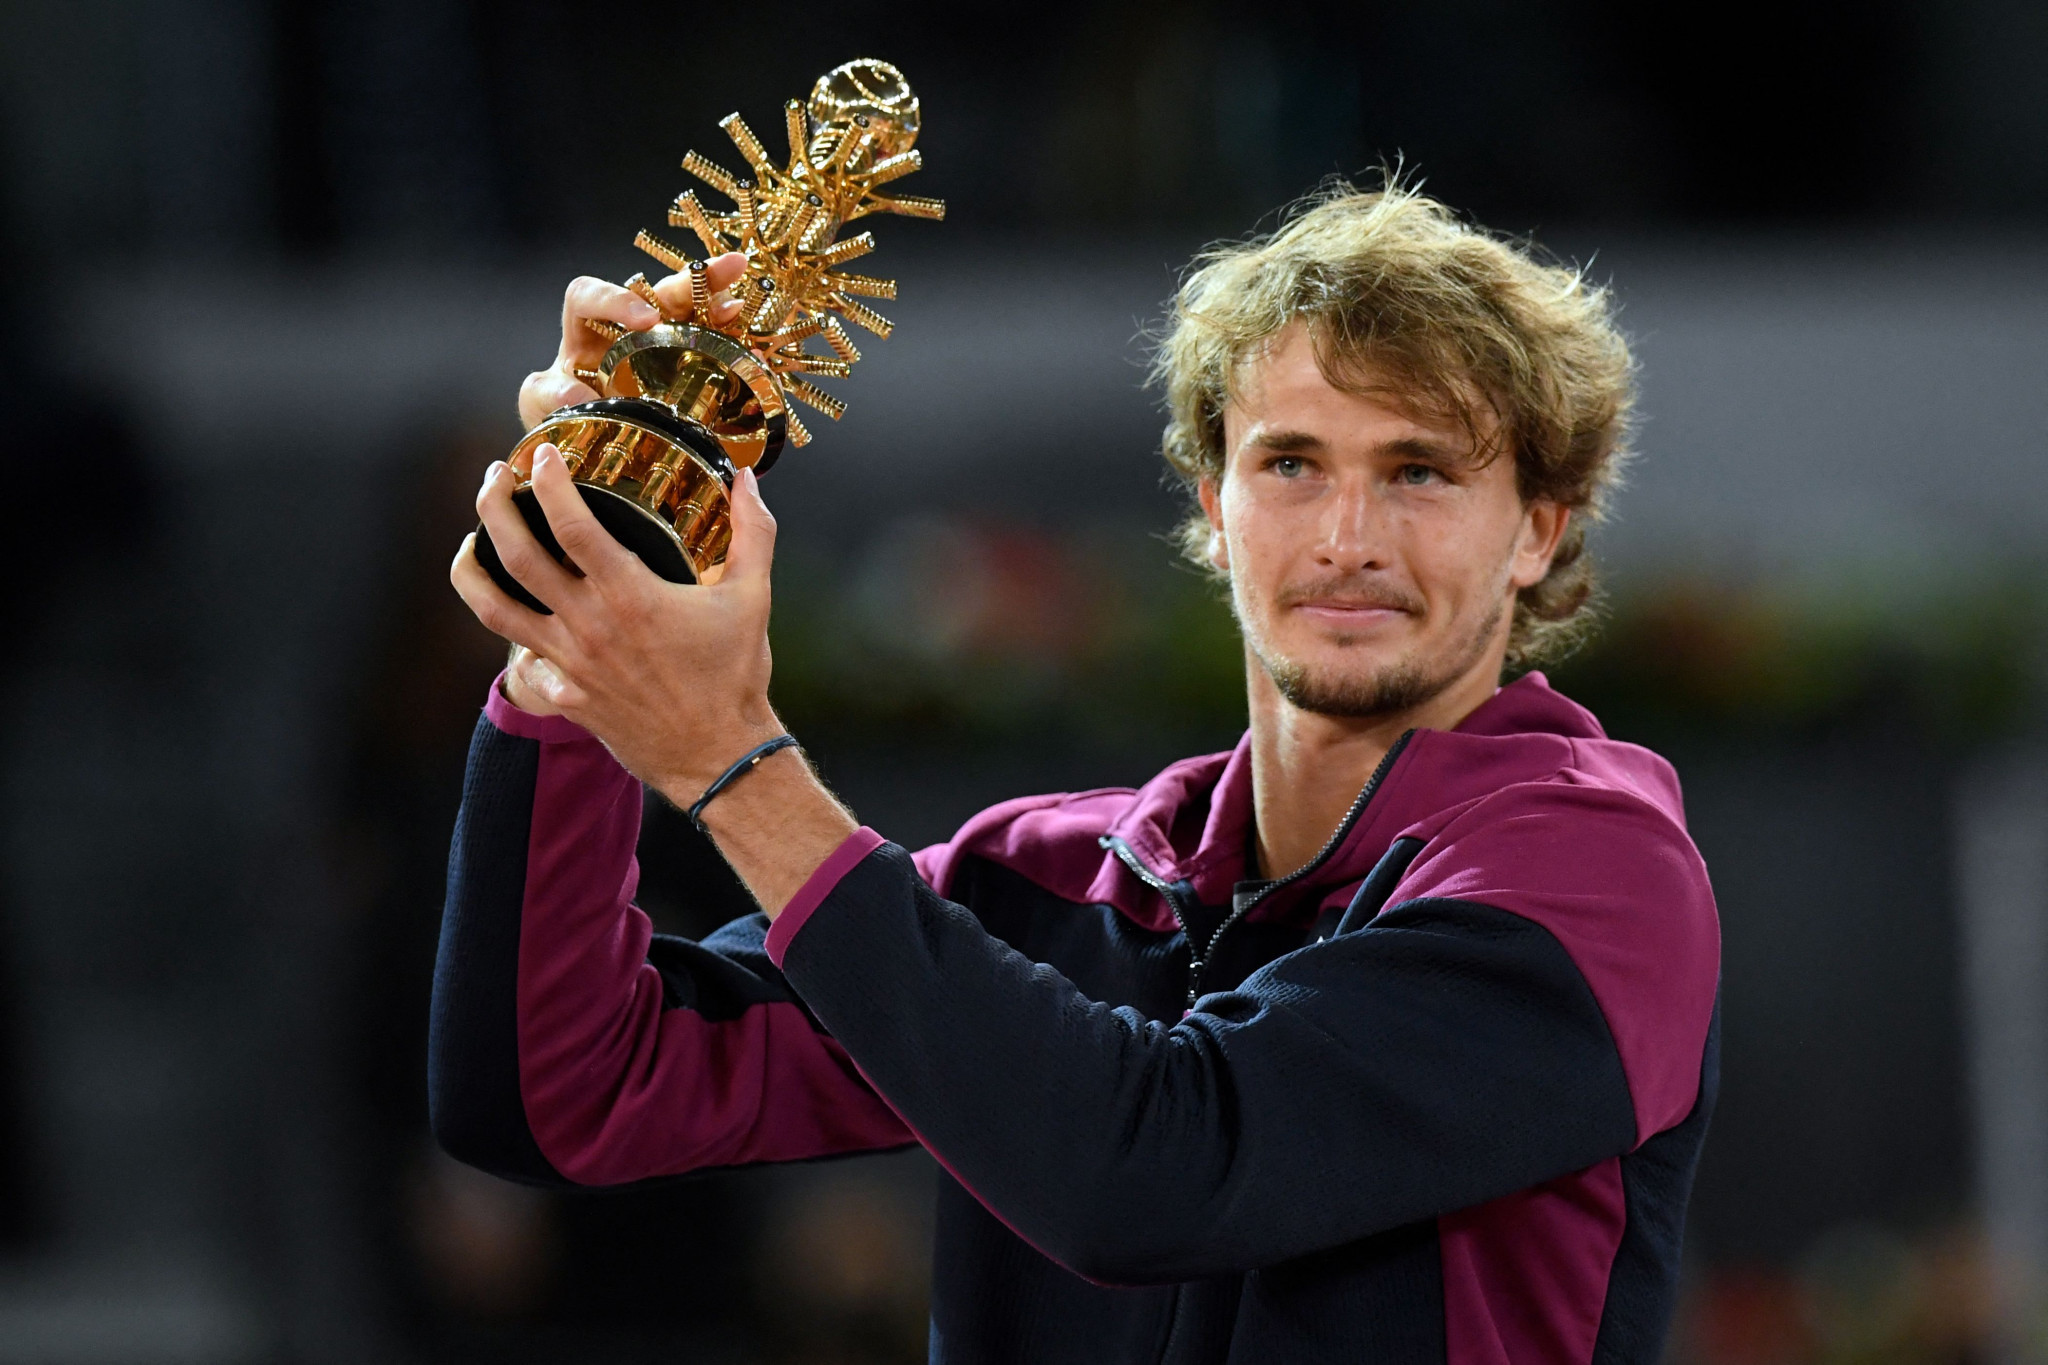 Alexander Zverev beat three top-10 players to win the Madrid Open ©Getty Images